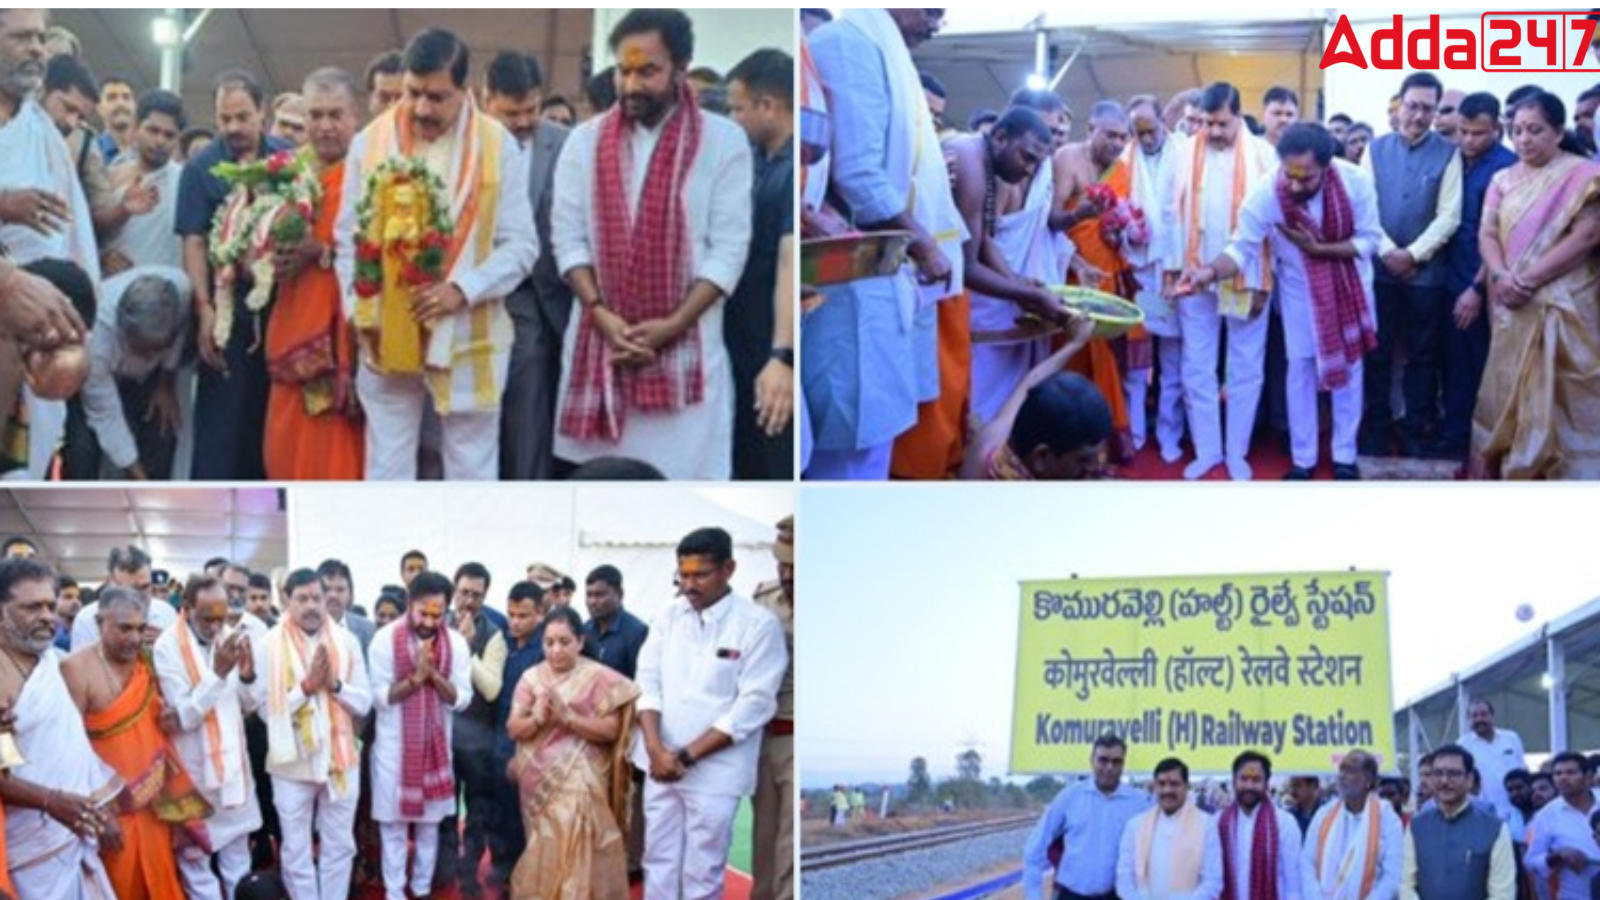 Tourism Minister Reddy Lays Foundation Stone For Komuravelli Railway Station In Siddipet, Telangana